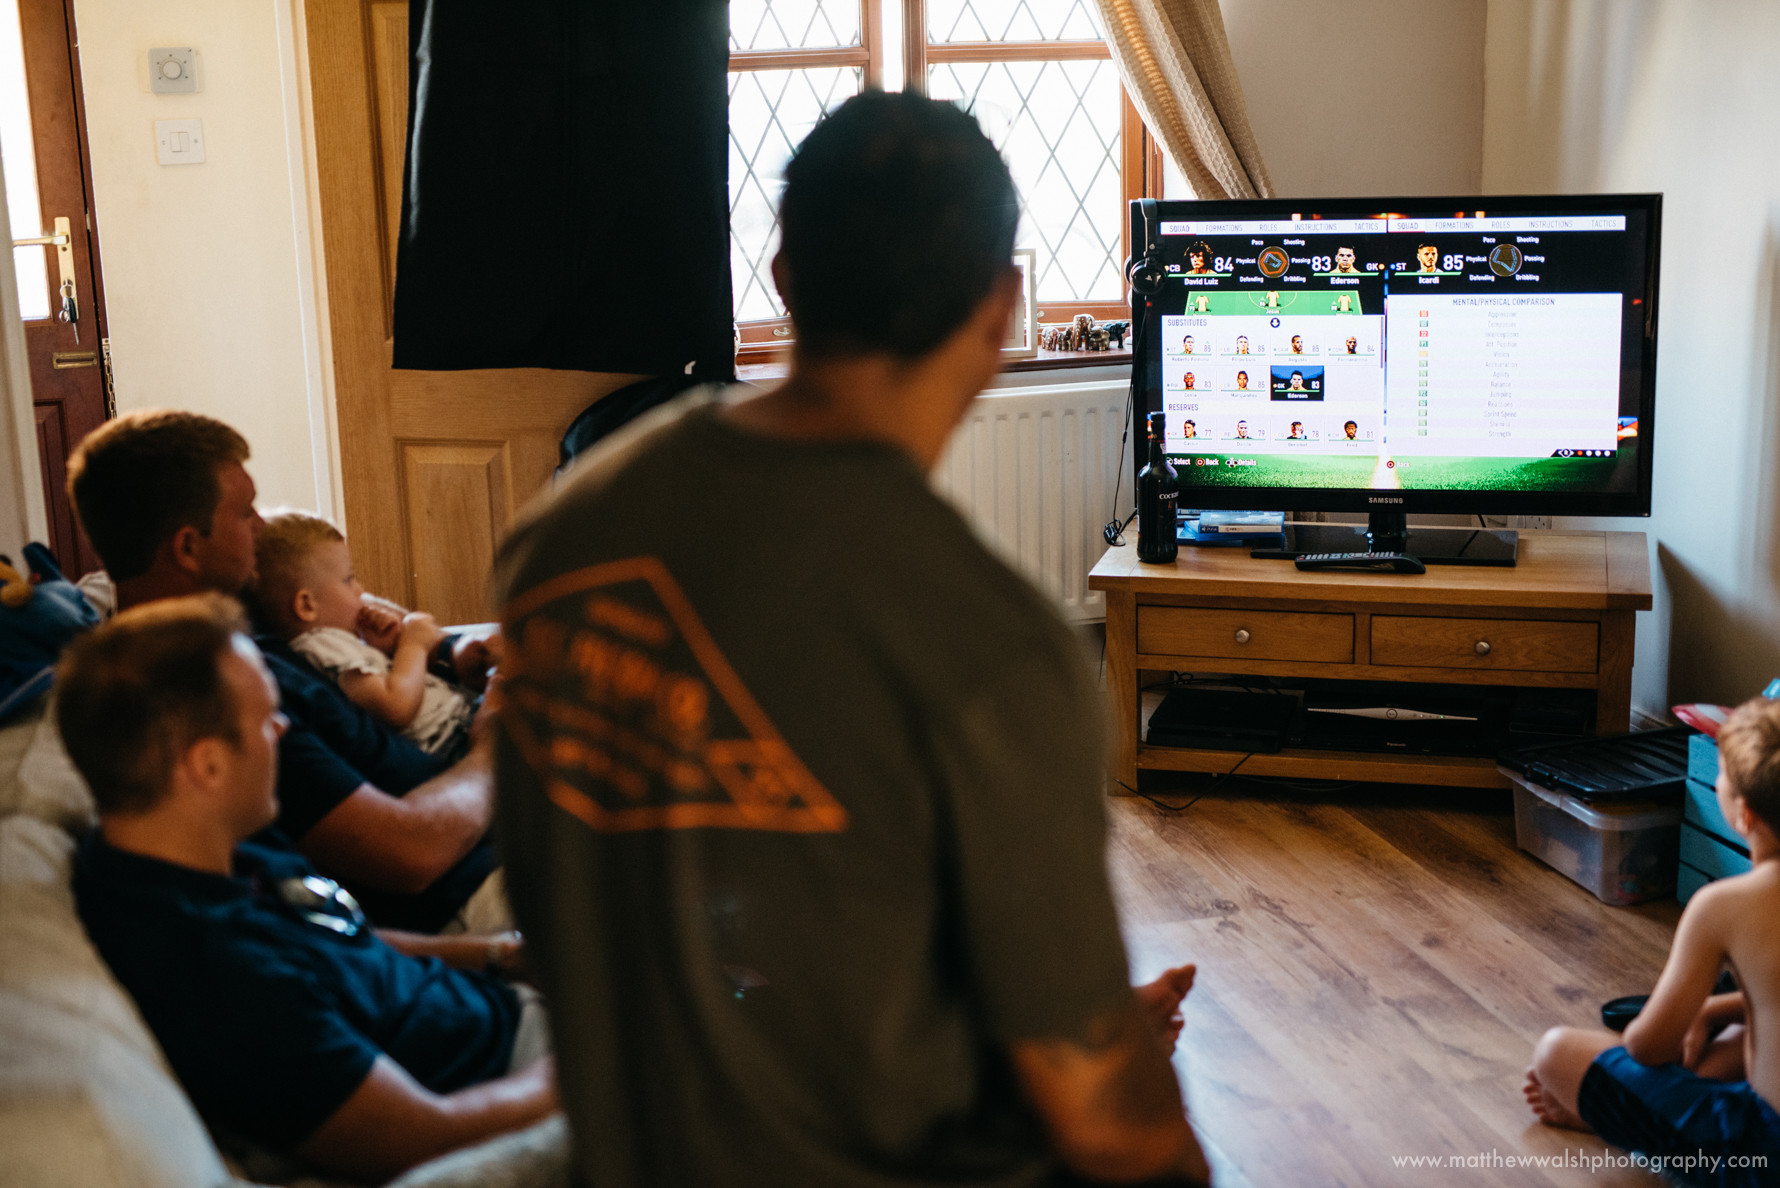 The groomsmen preparing by playing a video game